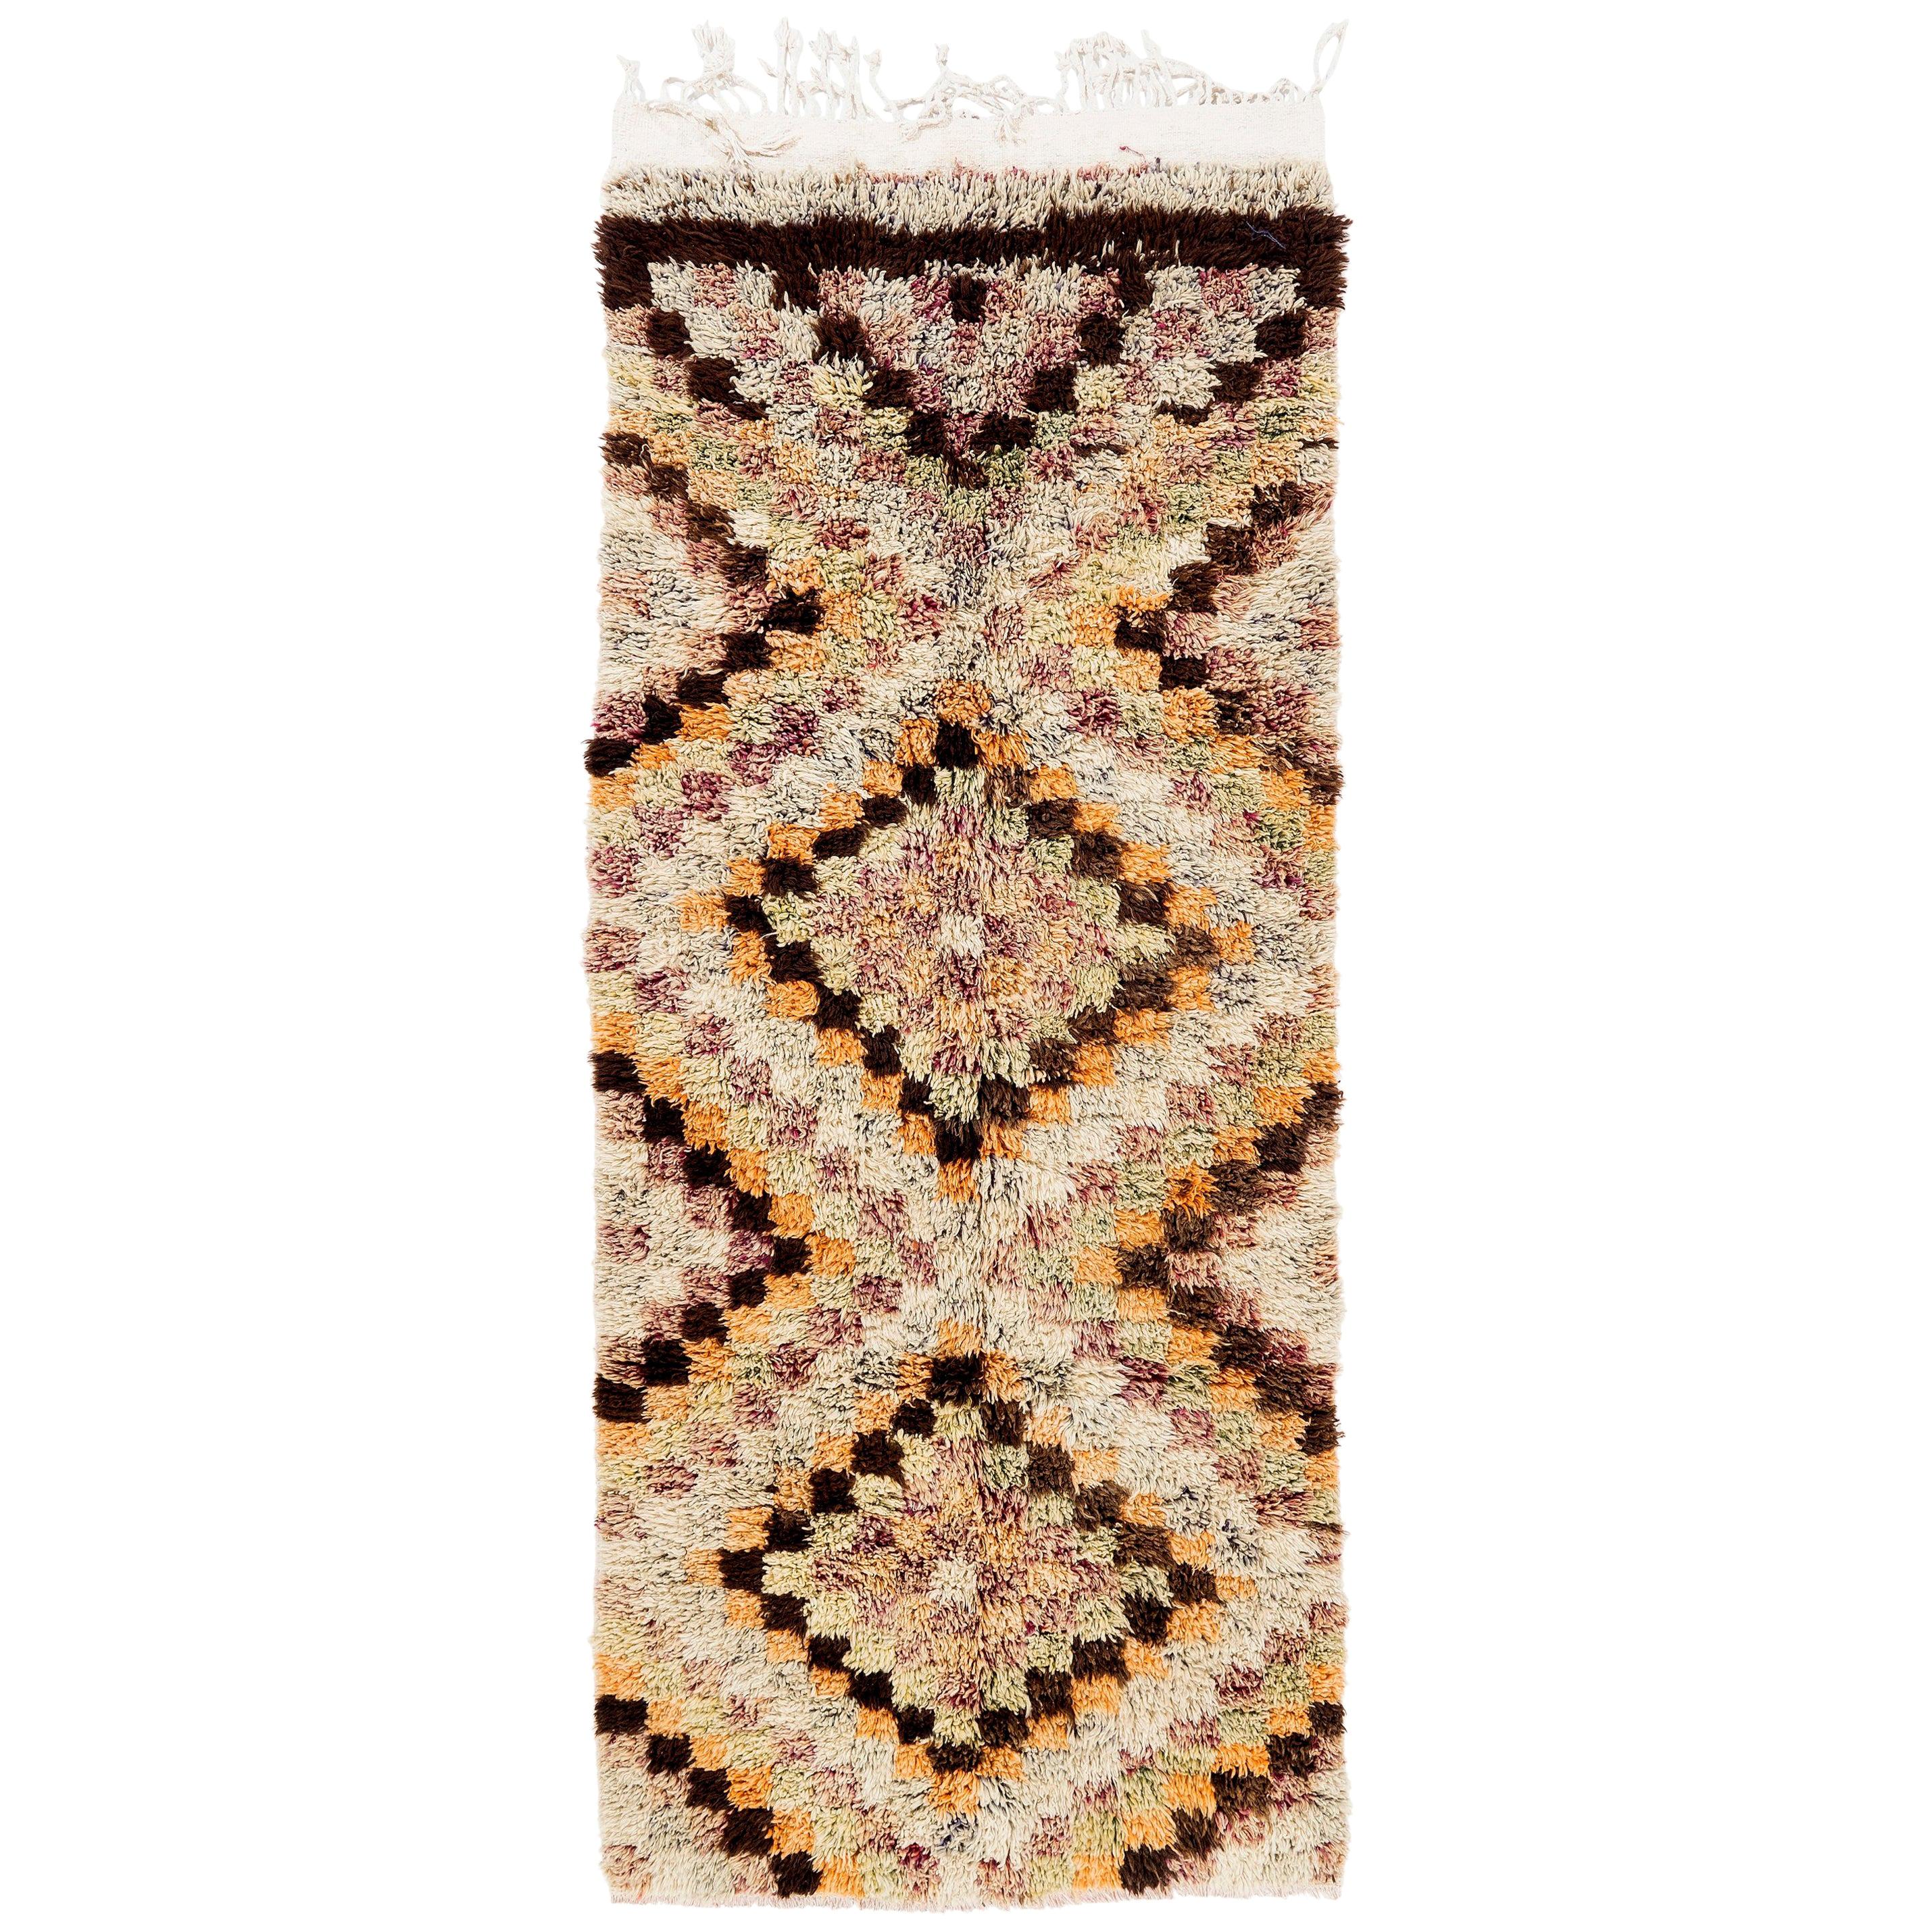 4x10 Ft Vintage Tulu Runner Rug with Checkered Design, Wool Hand-Knotted Carpet